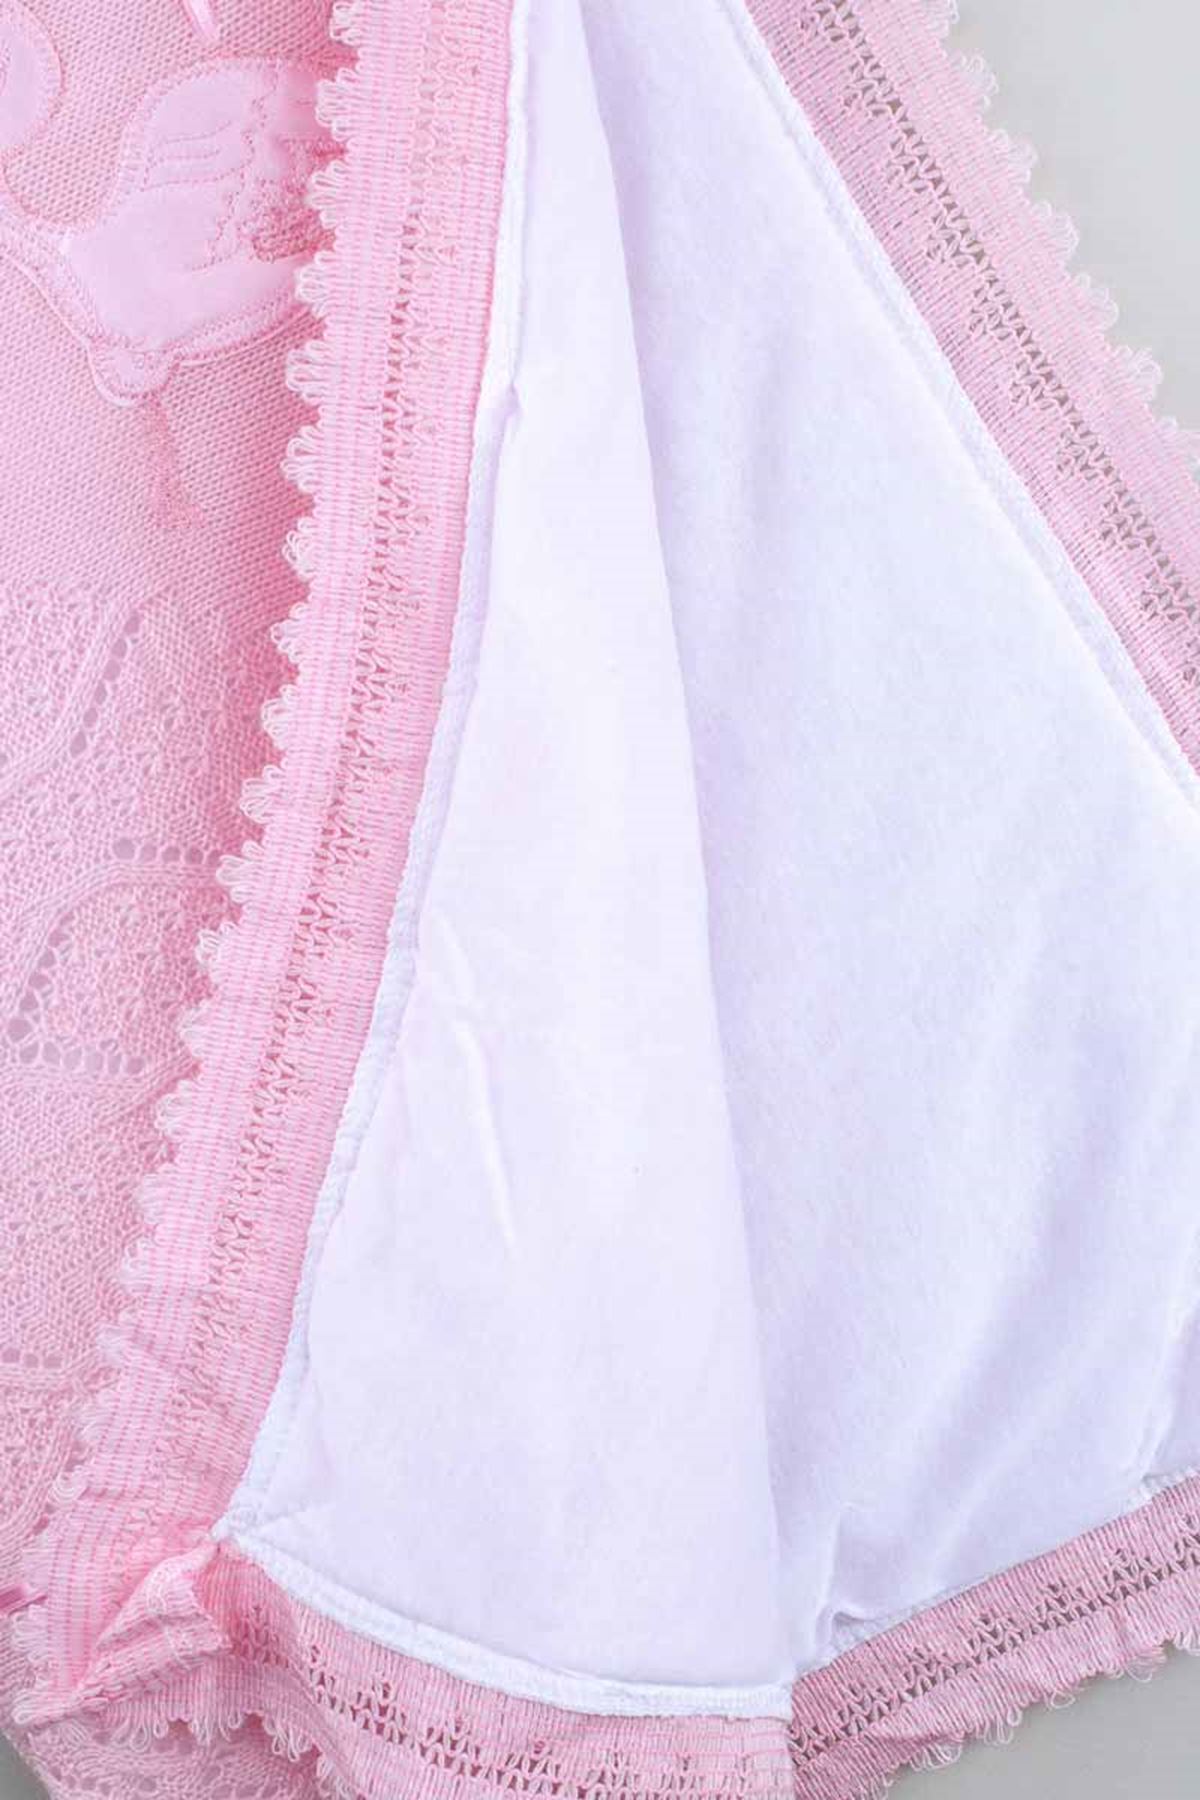 Pink baby girl knitwear knitted blanket 80*80 cm cotton soft comfortable warm daily use babies blanket models